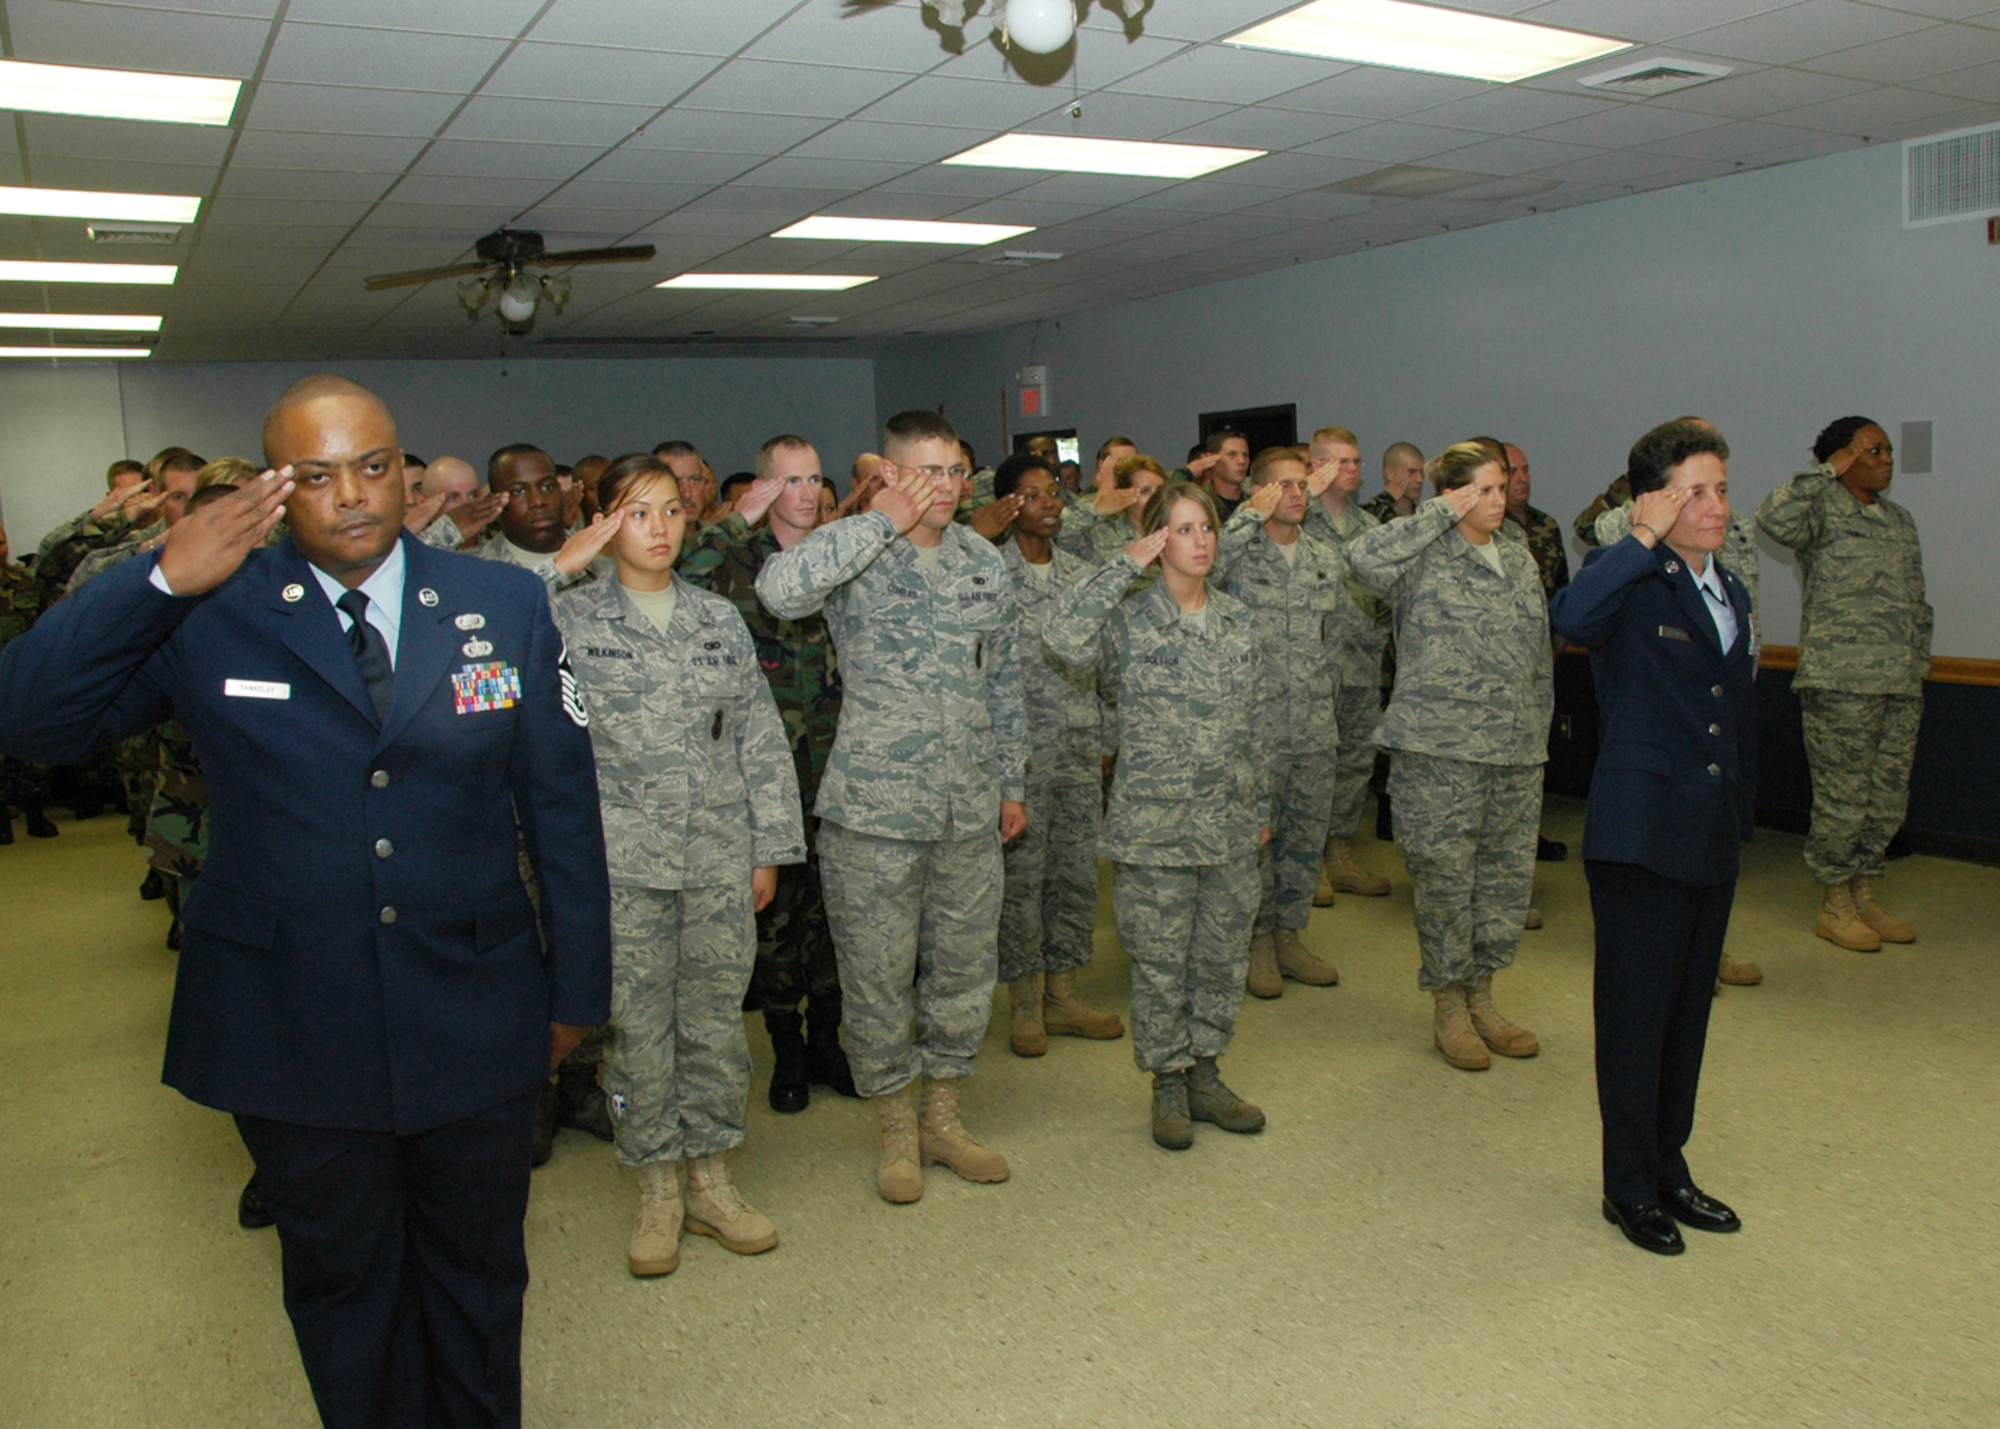 Members of the 131st Bomb Wing Mission Support Group render a first salute to their new commander, Colonel Terri Chaney, as she assumed command from Colonel Keith Smith during a ceremony on July 18 at the Base Community Center.  (Photo by Master Sgt. Mary-Dale Amison)